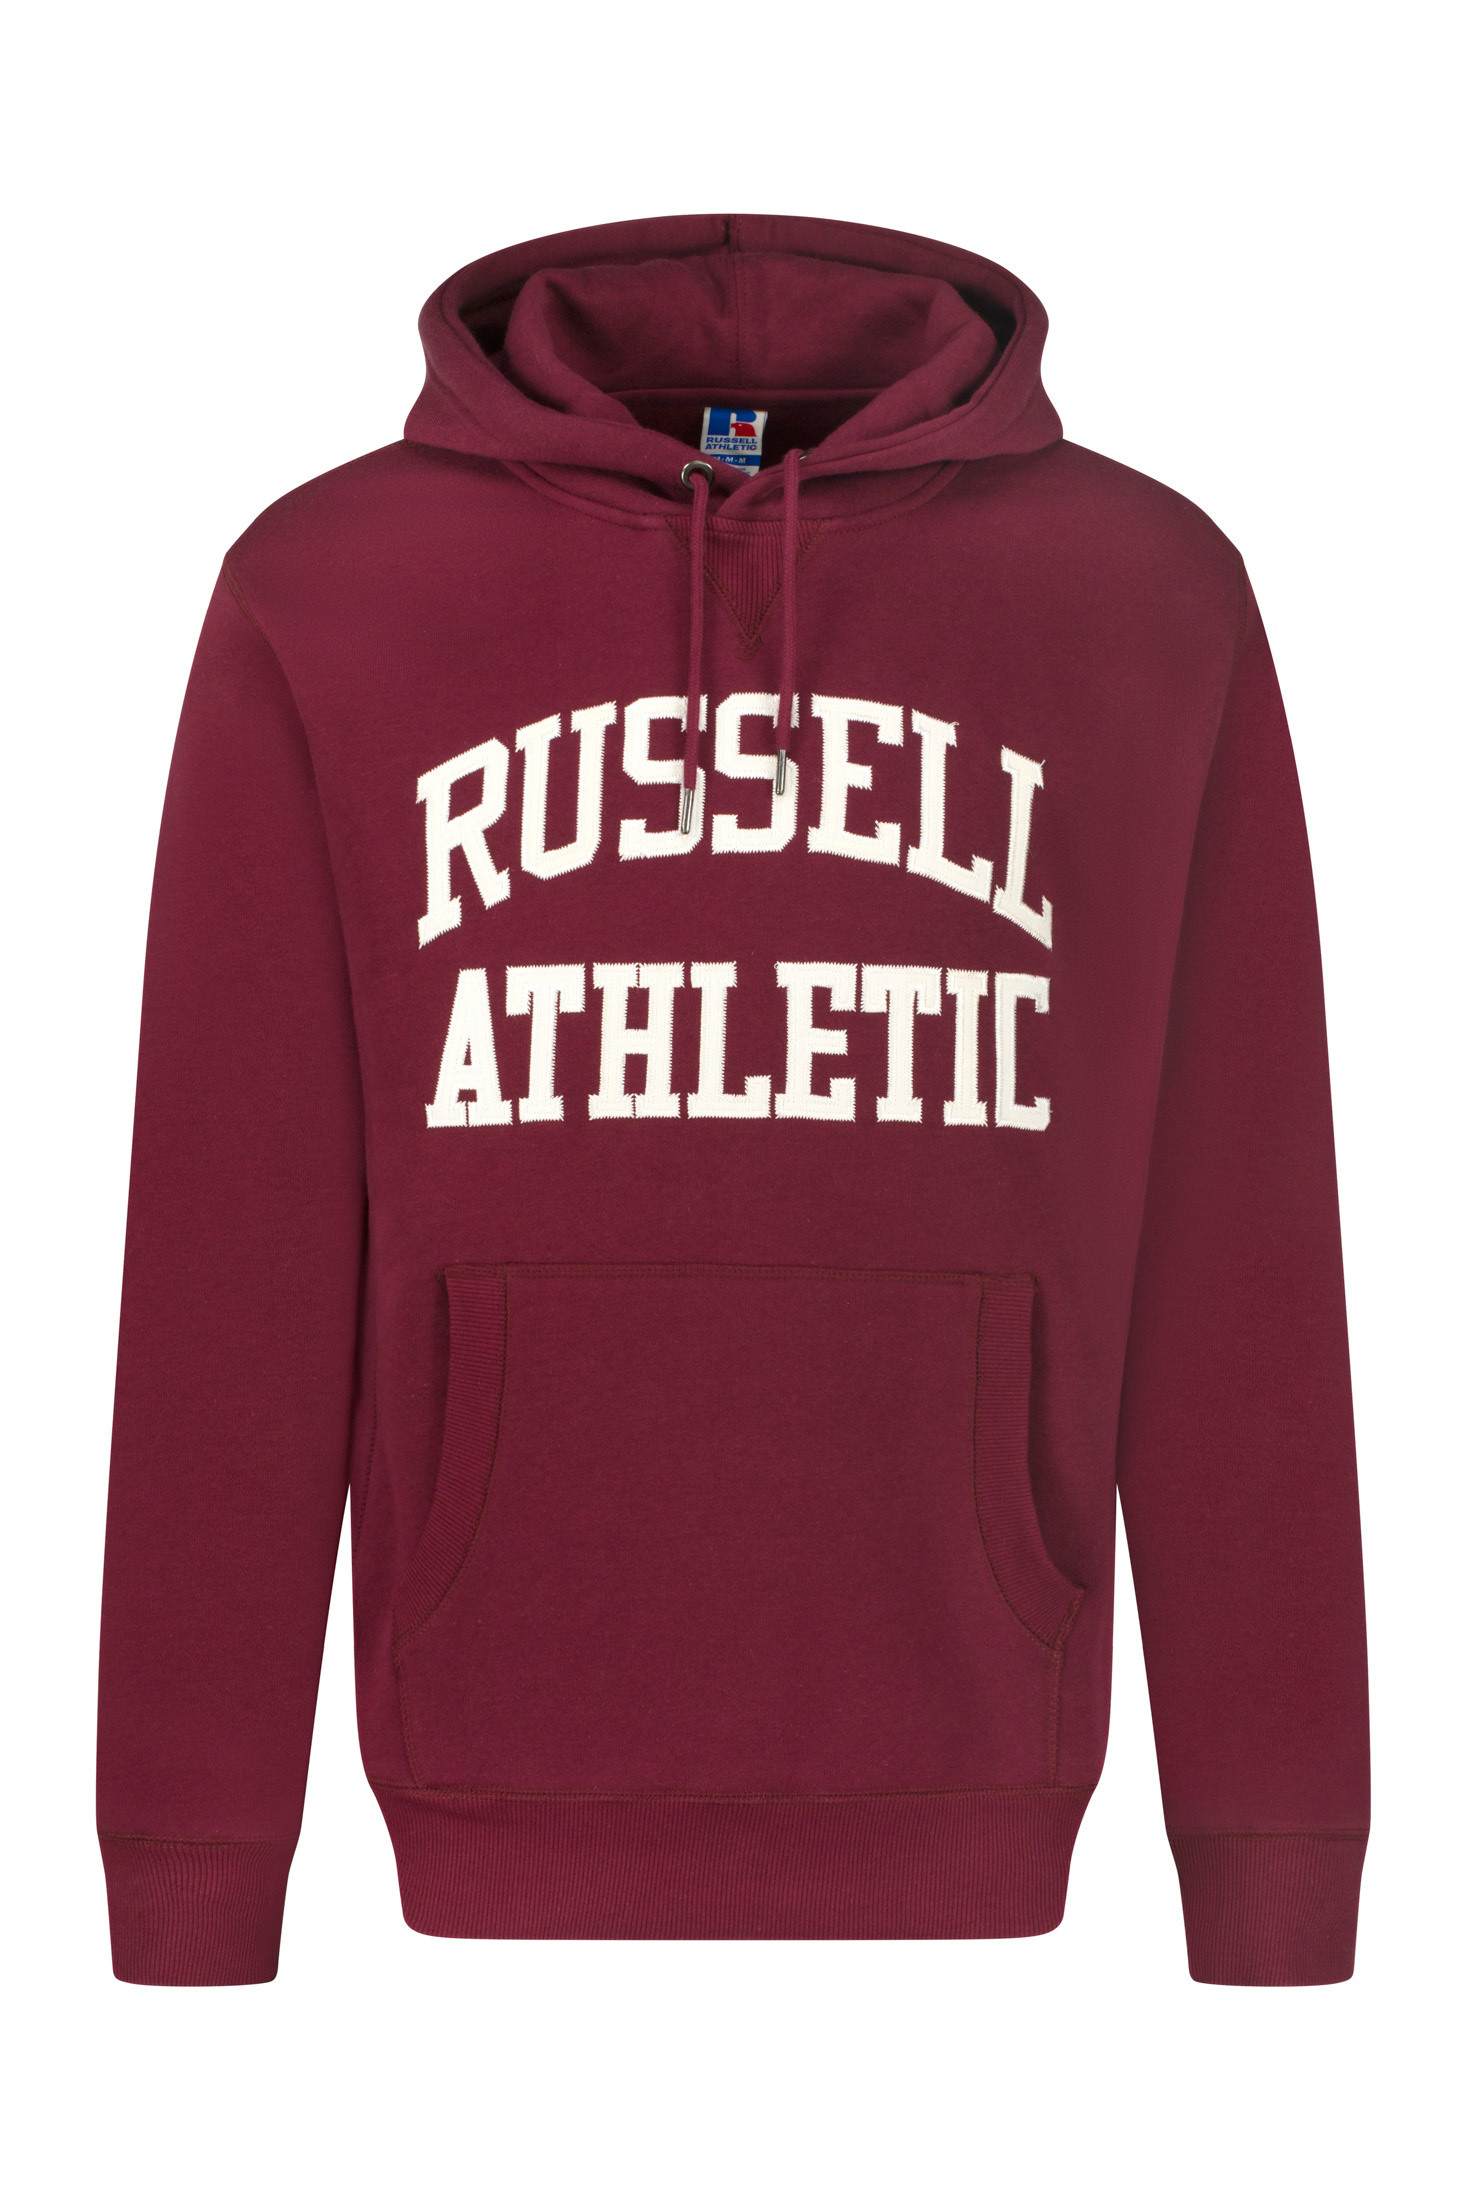 Russell Athletic - Hoodie, Red Bordeaux, large image number 0